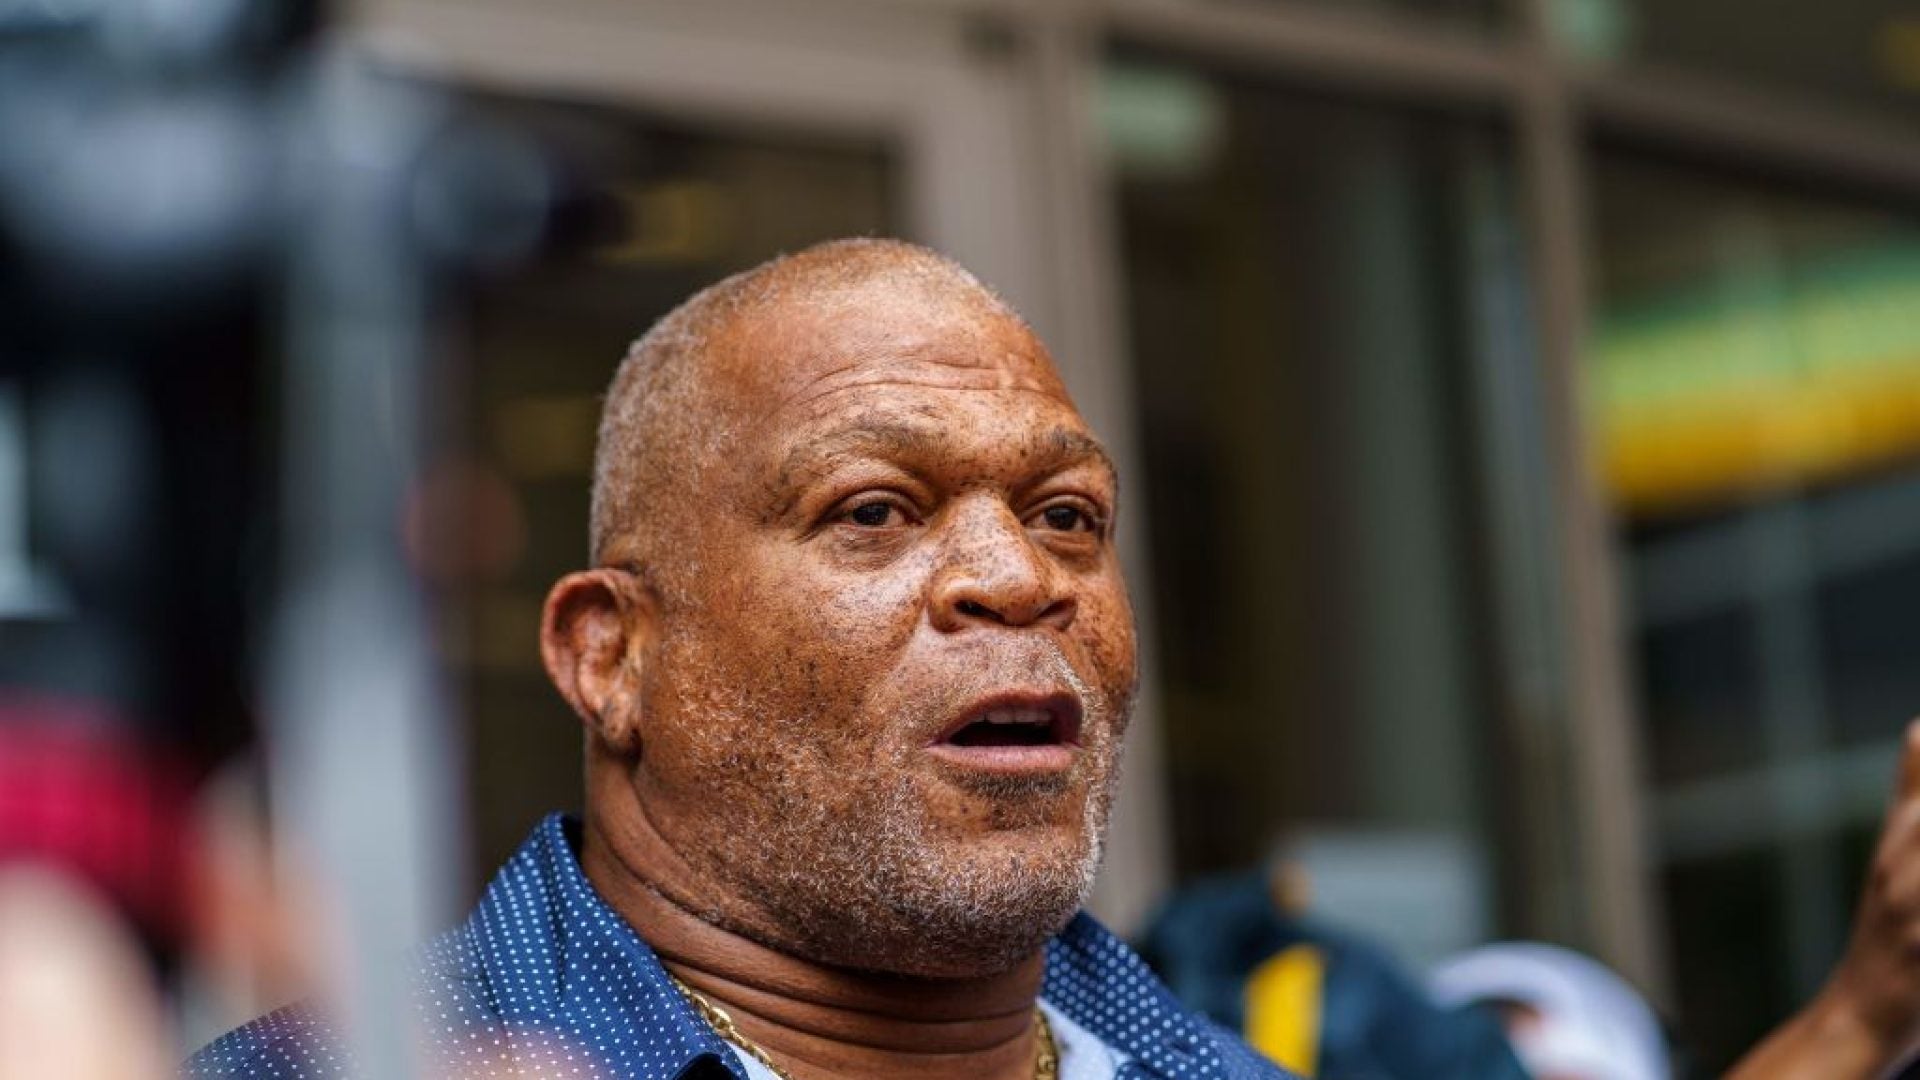 It’s “Not Surprising”: Selwyn Jones, George Floyd’s Uncle, Speaks Out About DOJ Findings In Minneapolis And The Charity He Co-Founded To Create Change